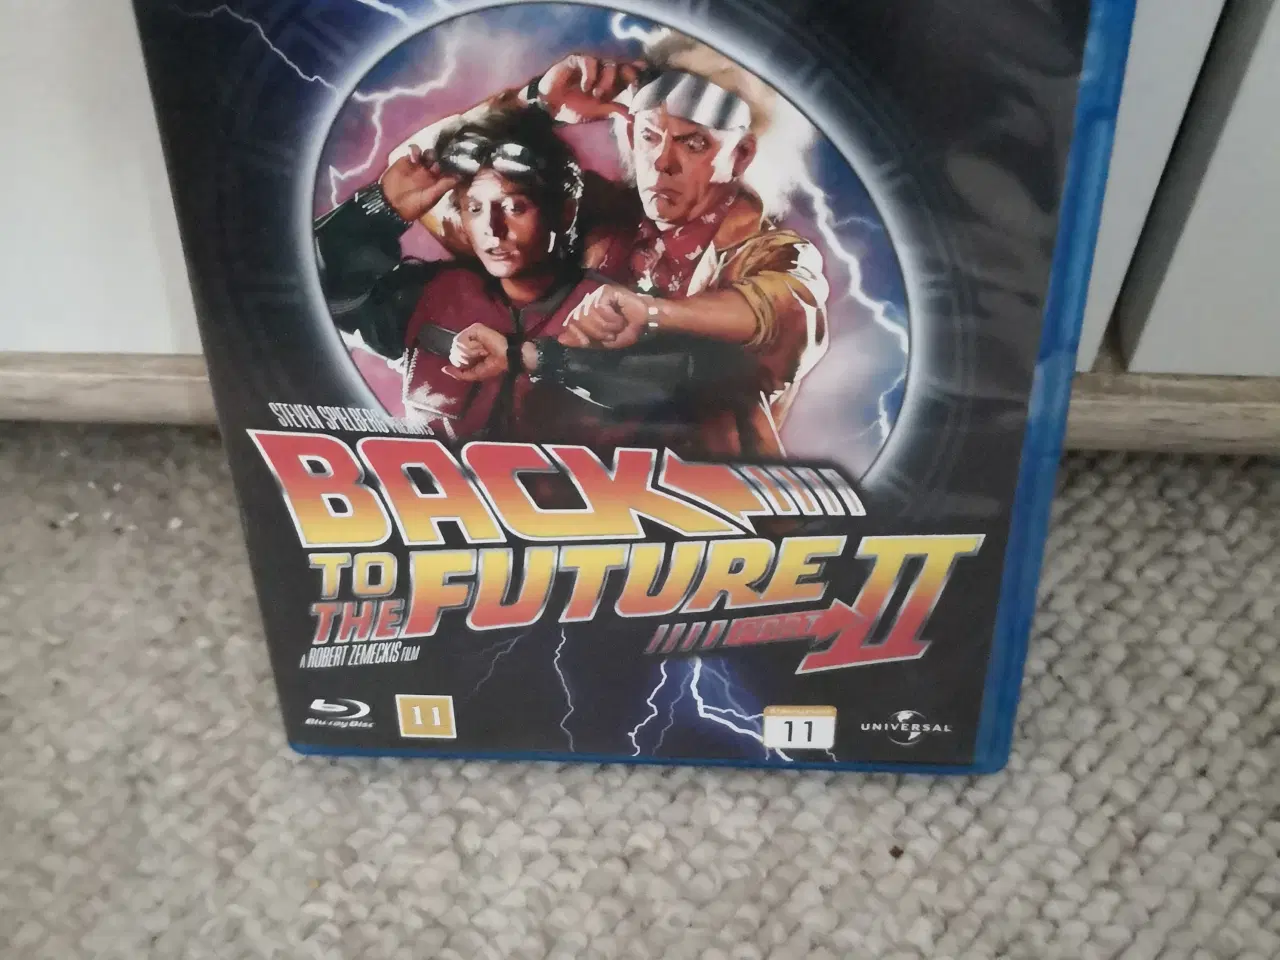 Billede 1 - Back to the future part 2